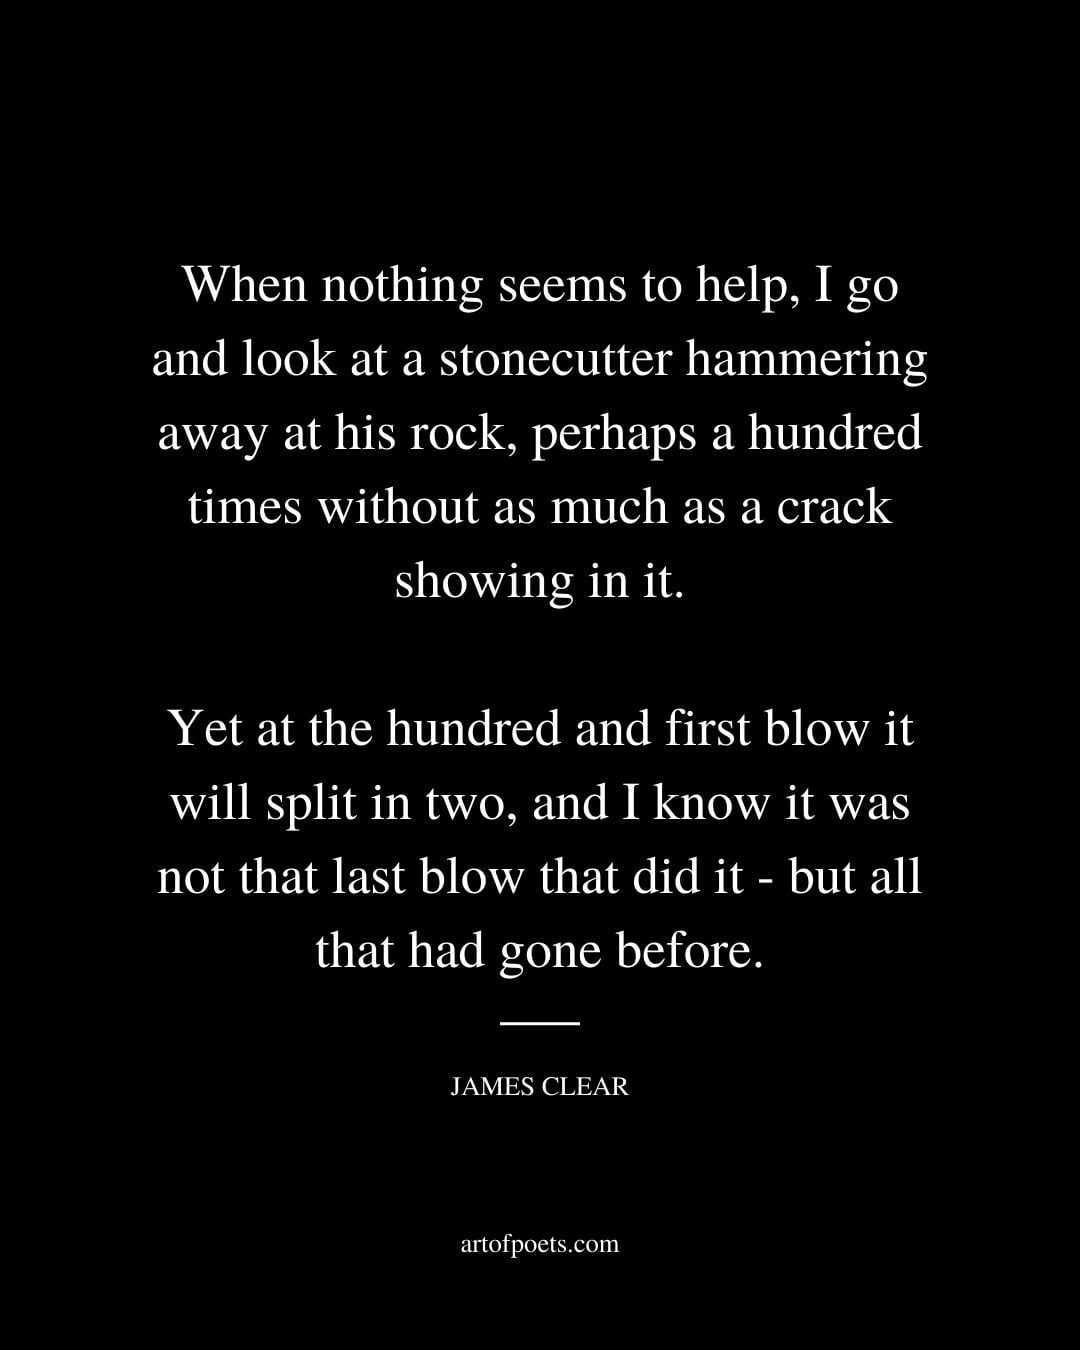 When nothing seems to help I go and look at a stonecutter hammering away at his rock perhaps a hundred times without as much as a crack showing in it